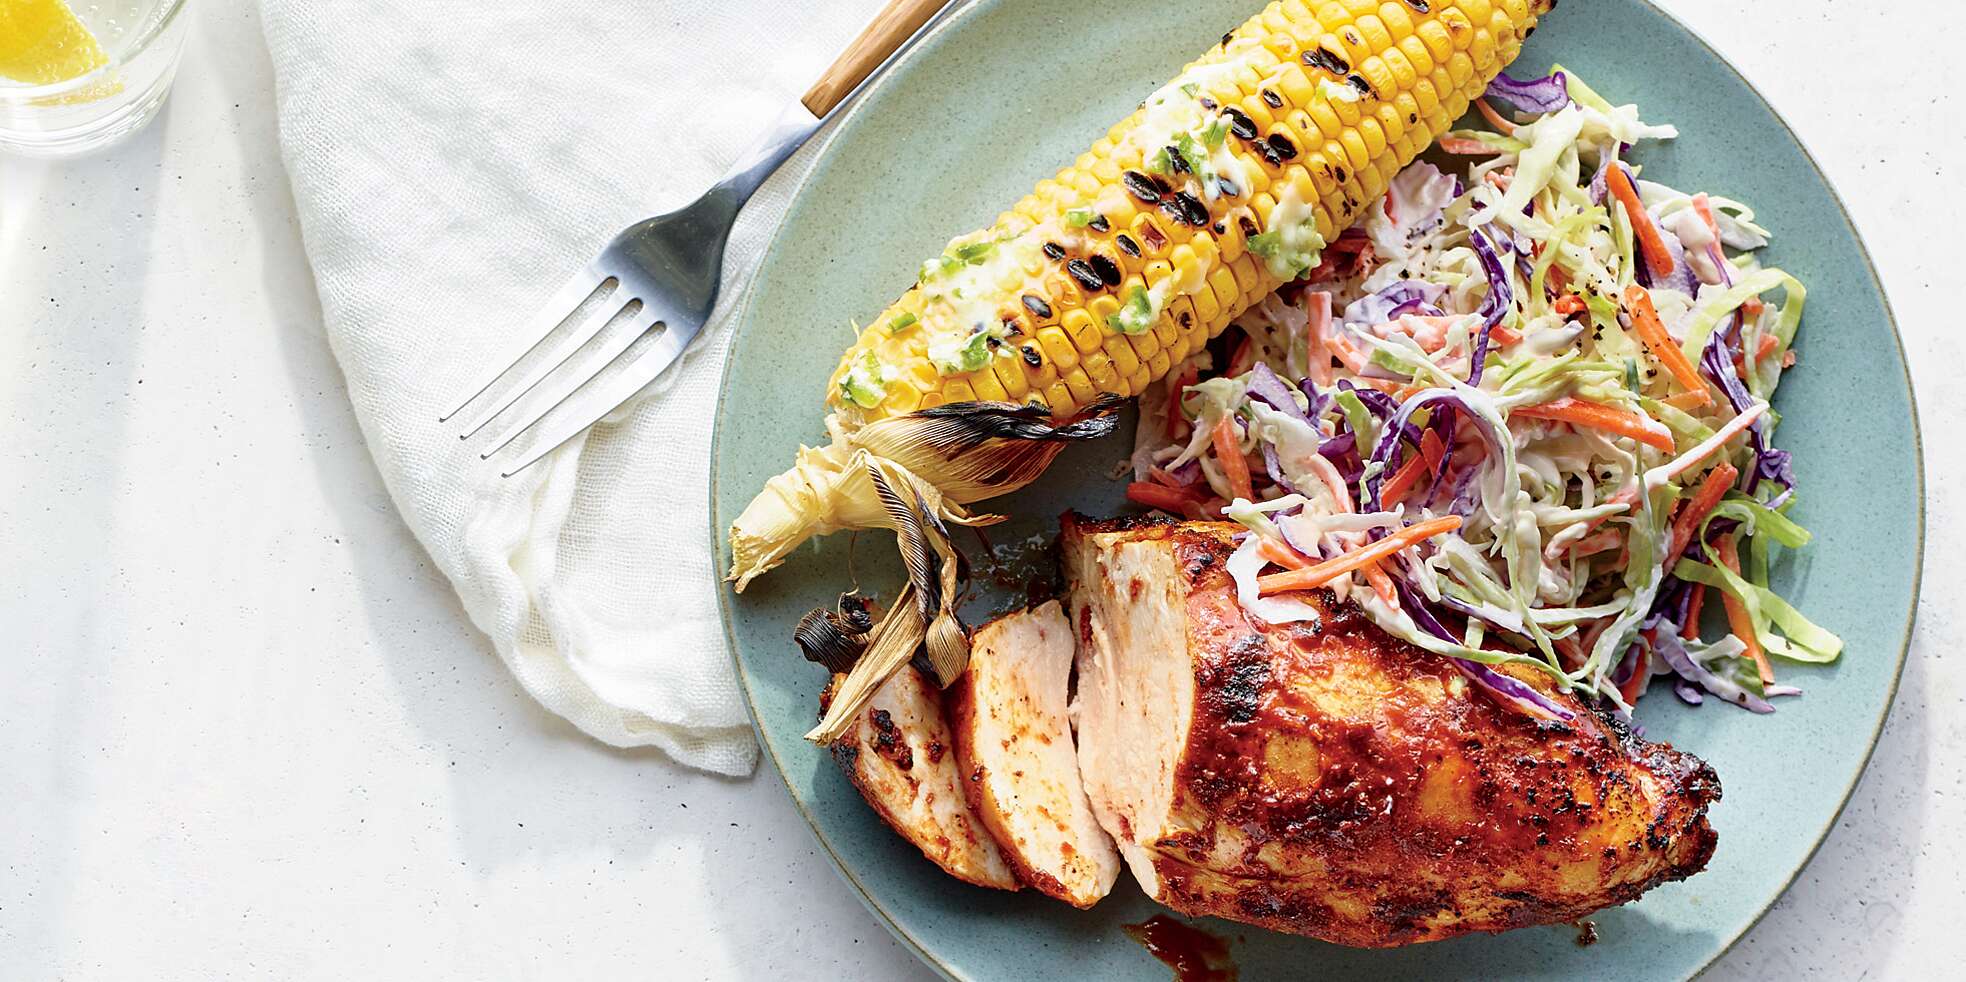 Obsessed with Southern Food? Here's the Barbecue Menu You Need for this ...